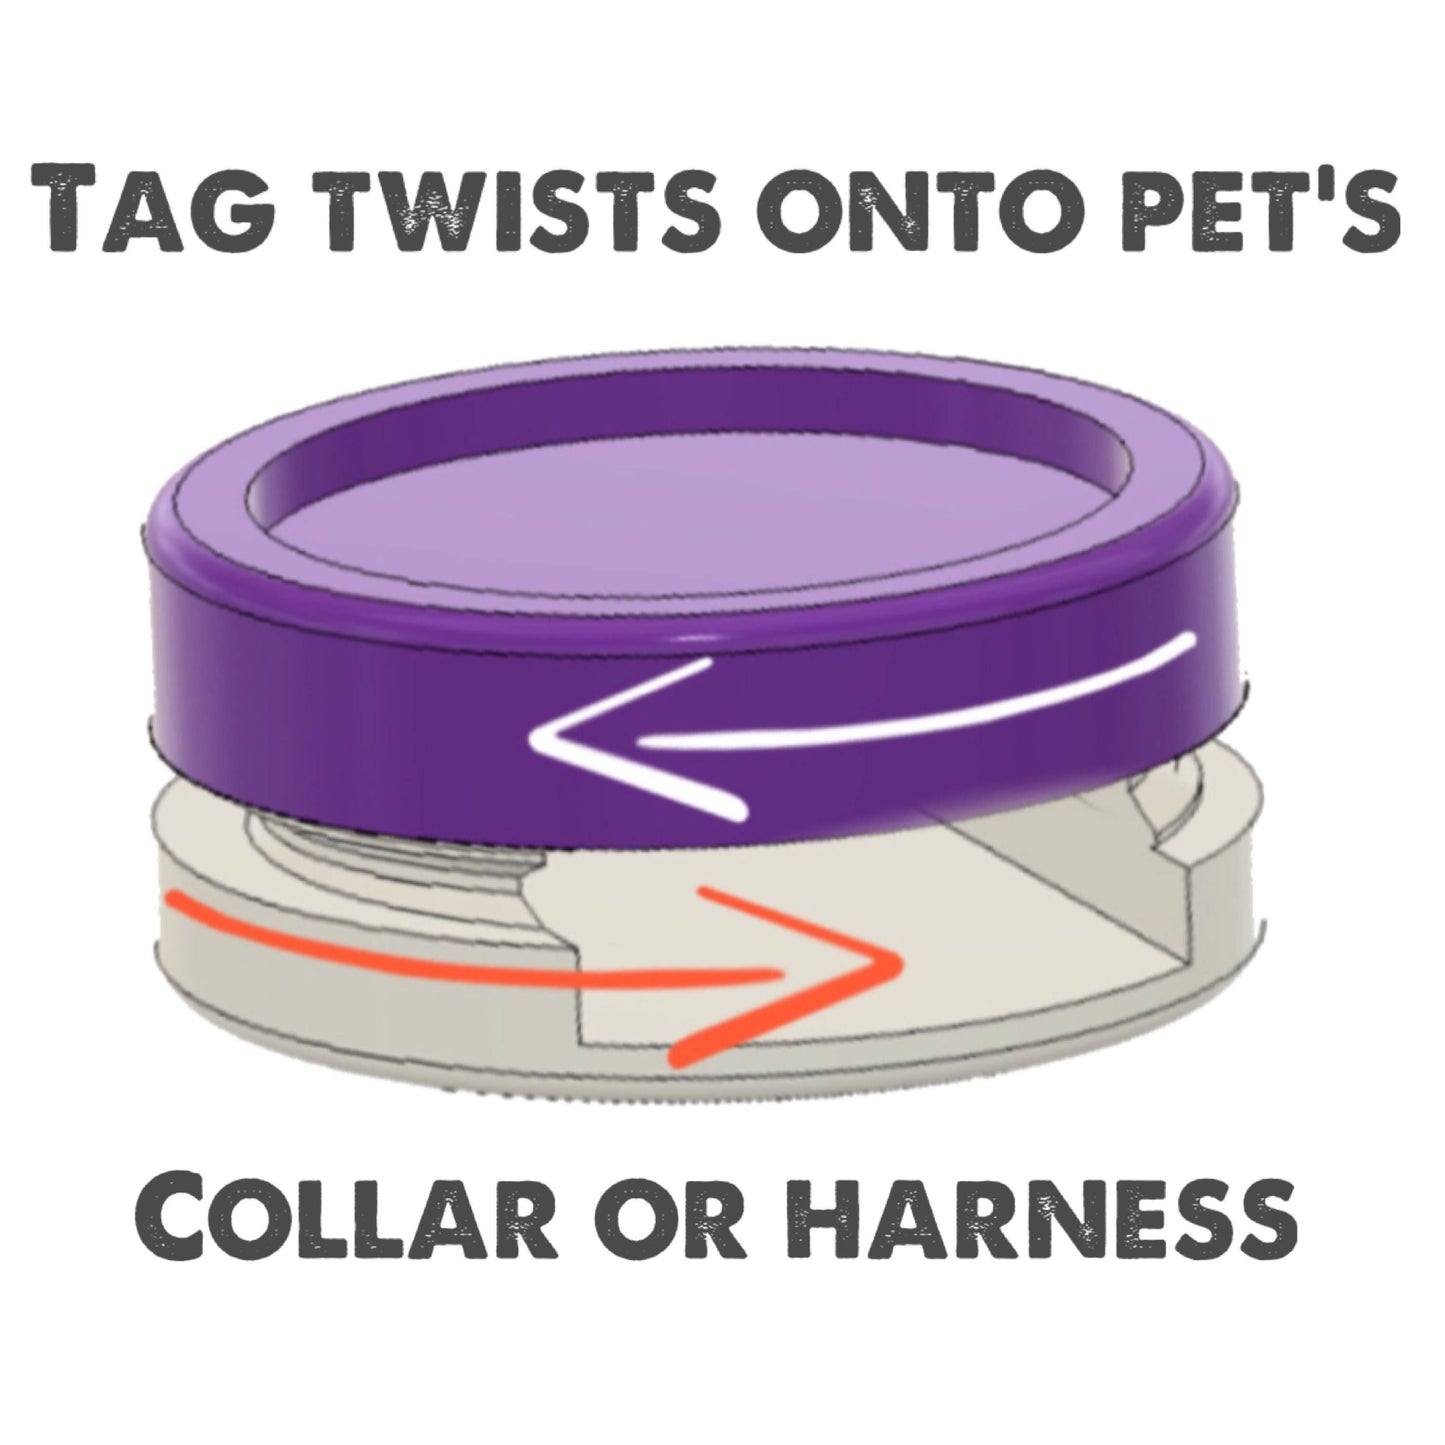 Oh Poop Scannable QR Code TWIST Tag- Silent, Eco-Friendly, Ringless ID Tag for Cats and Dogs- Powered by PetHub